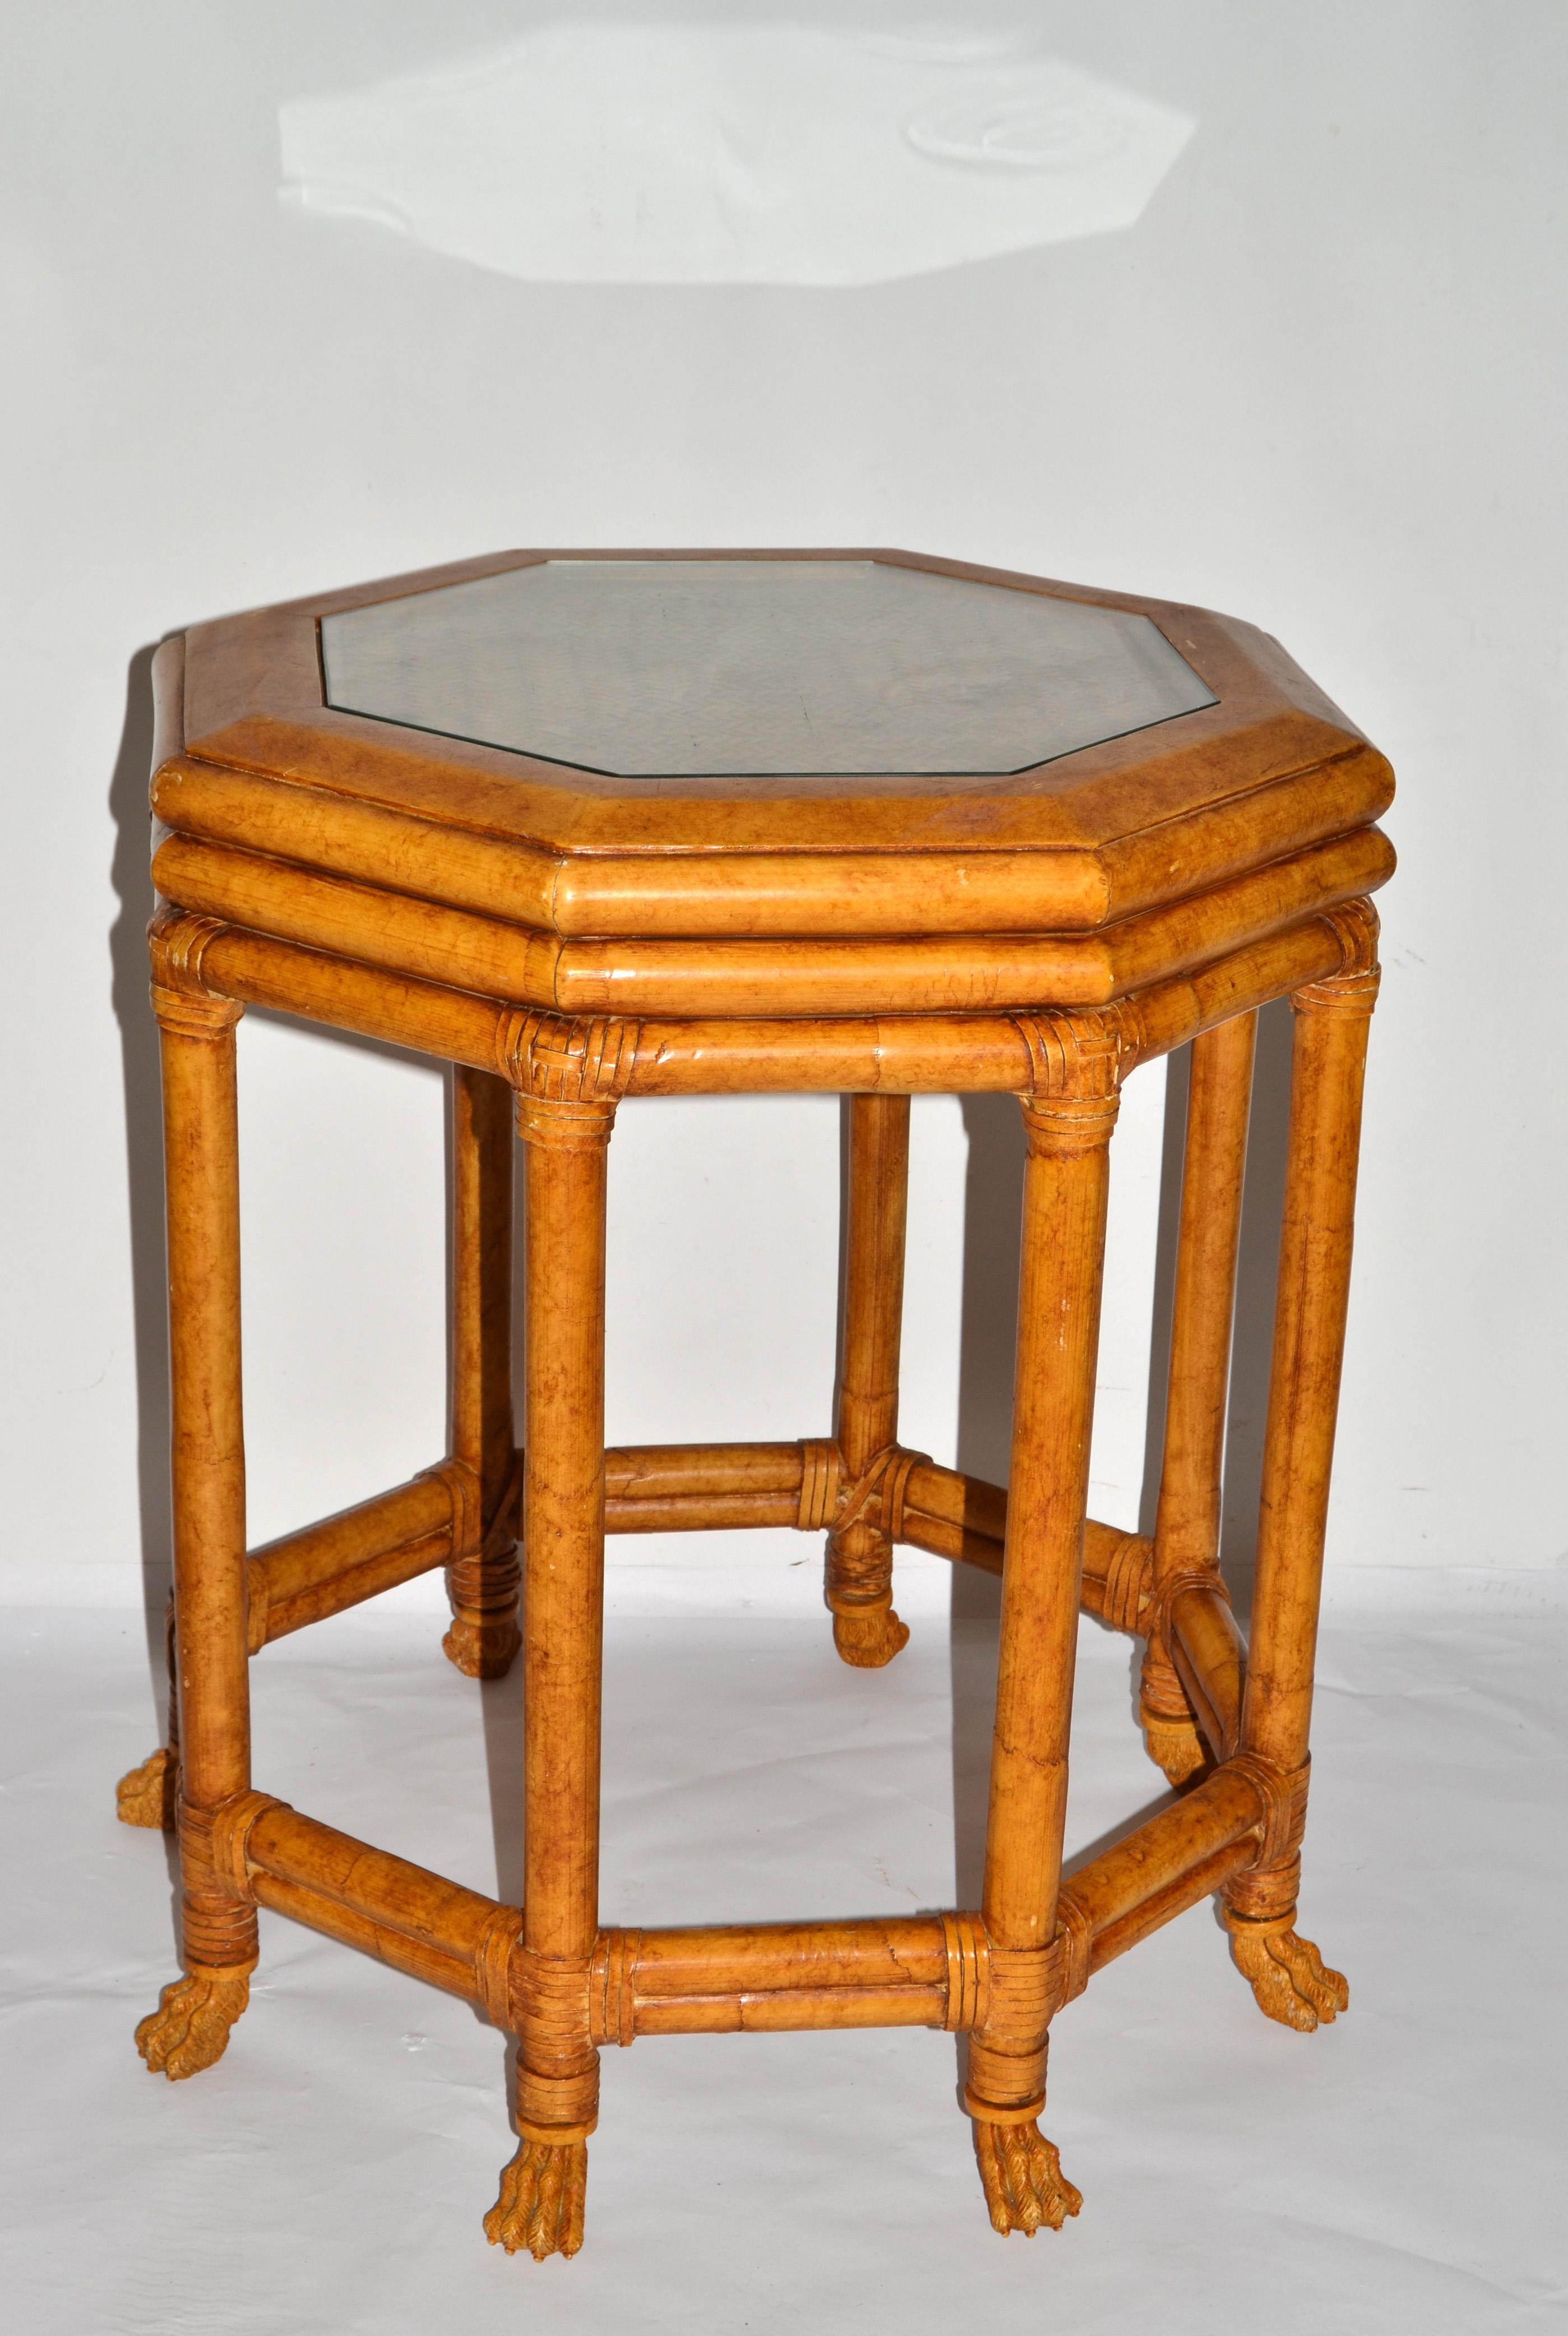 American McGuire Style Octagonal Bamboo Burl Veneer Leather Bindings Glass Accent Table  For Sale